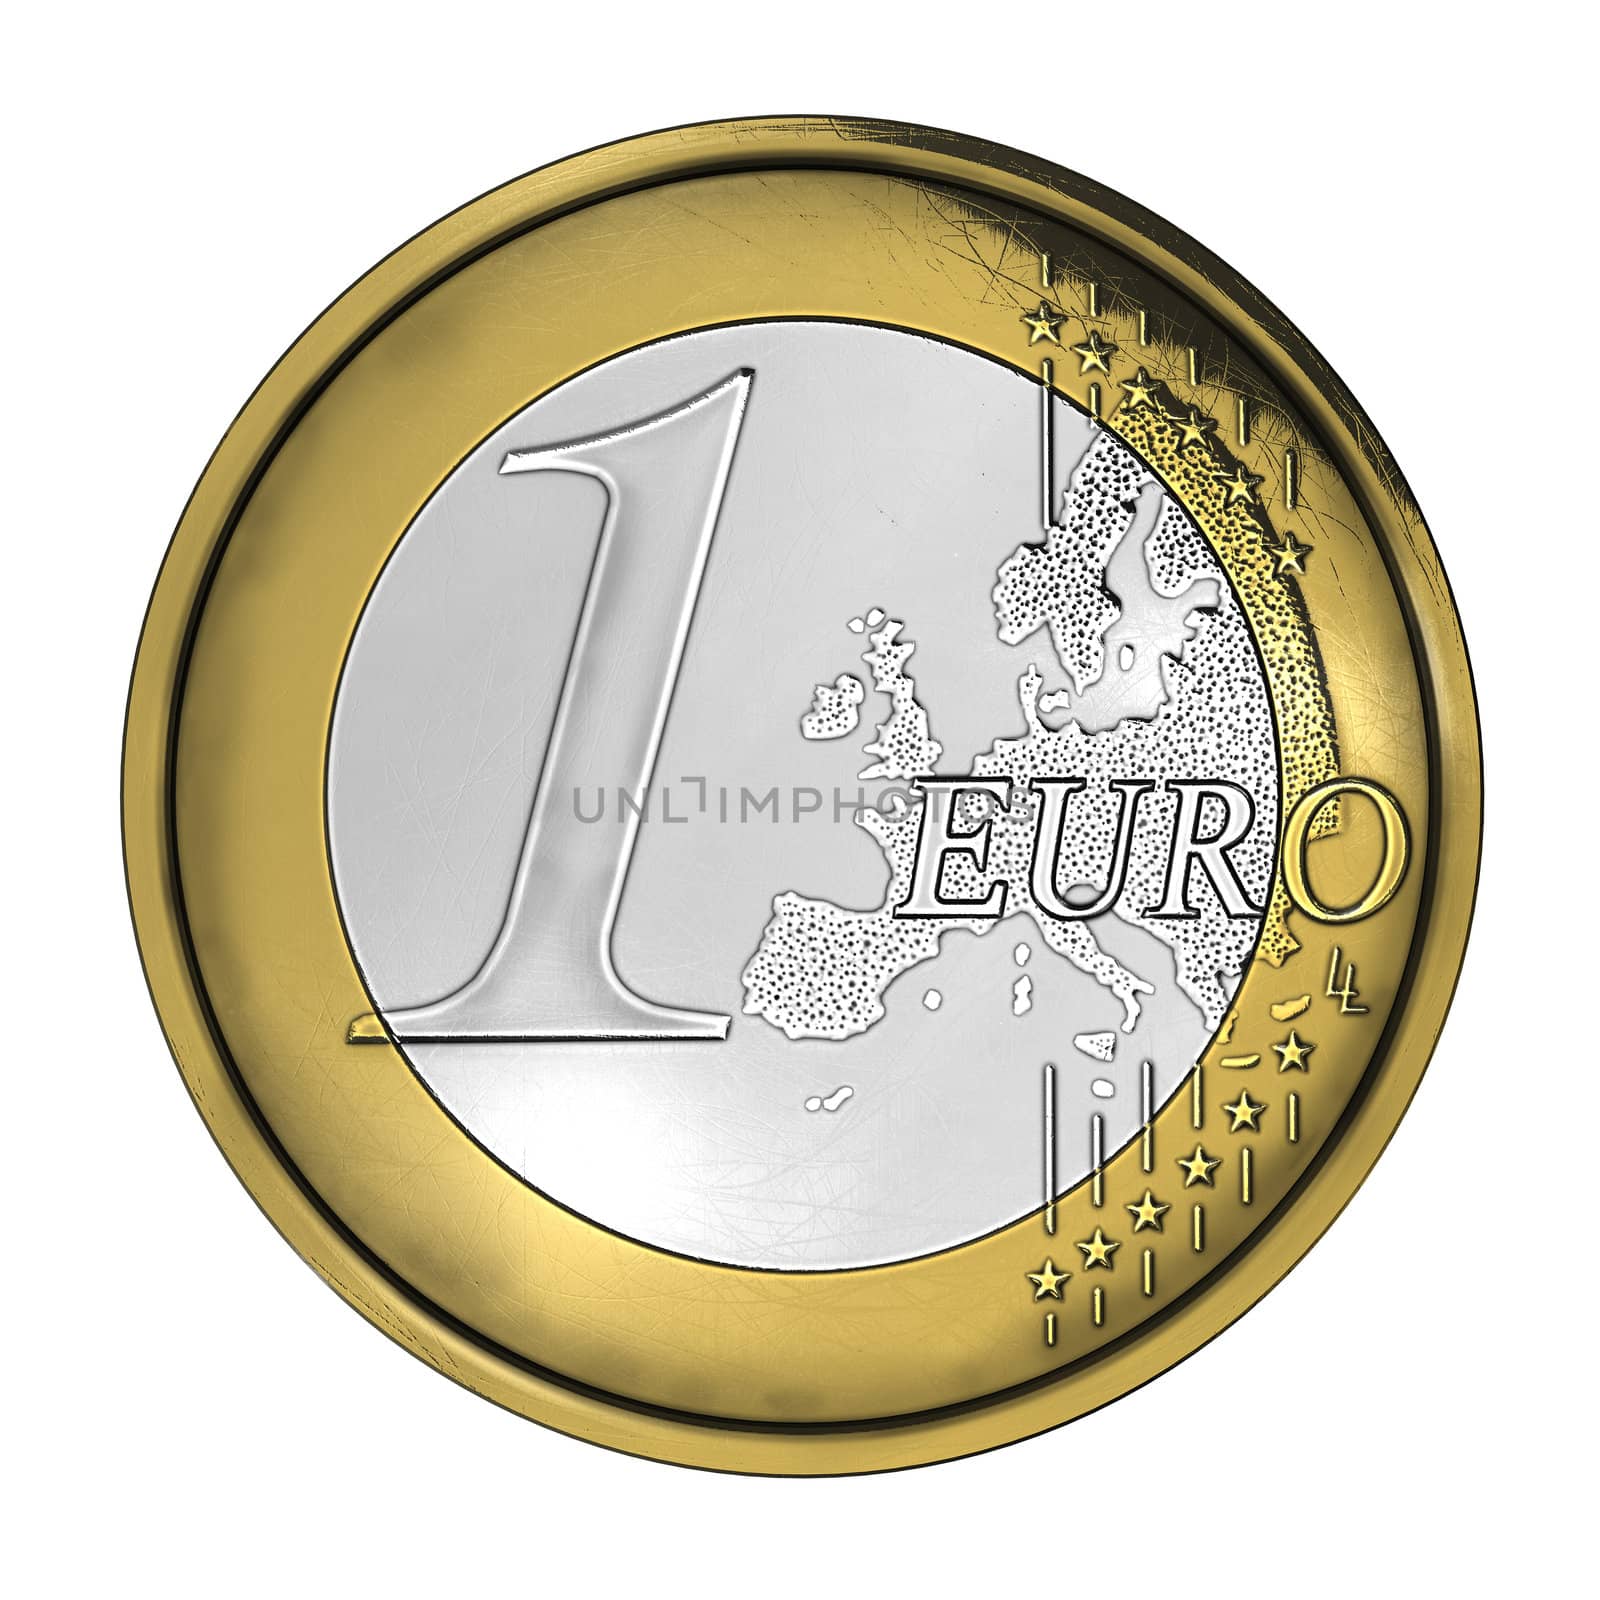 One high detailed scratched shiny euro coin by woodoo